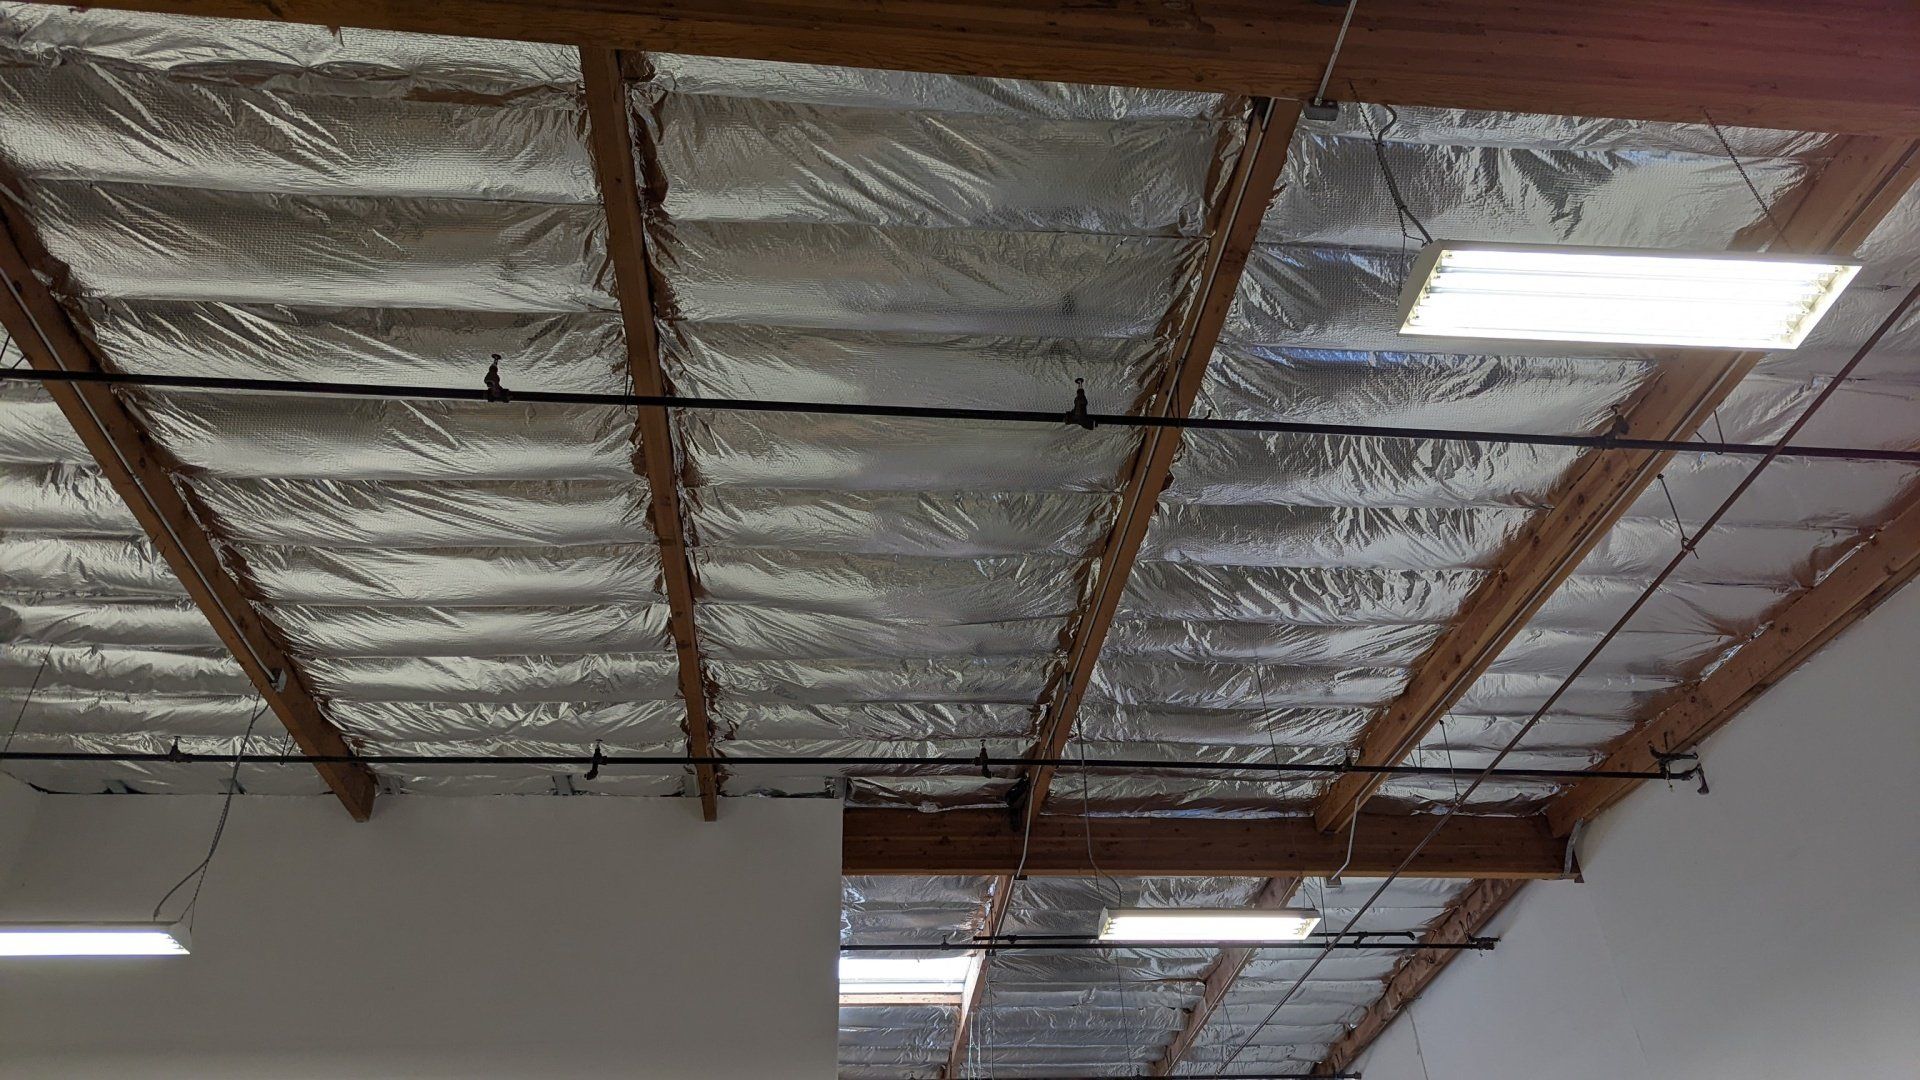 suspended acoustic ceilings